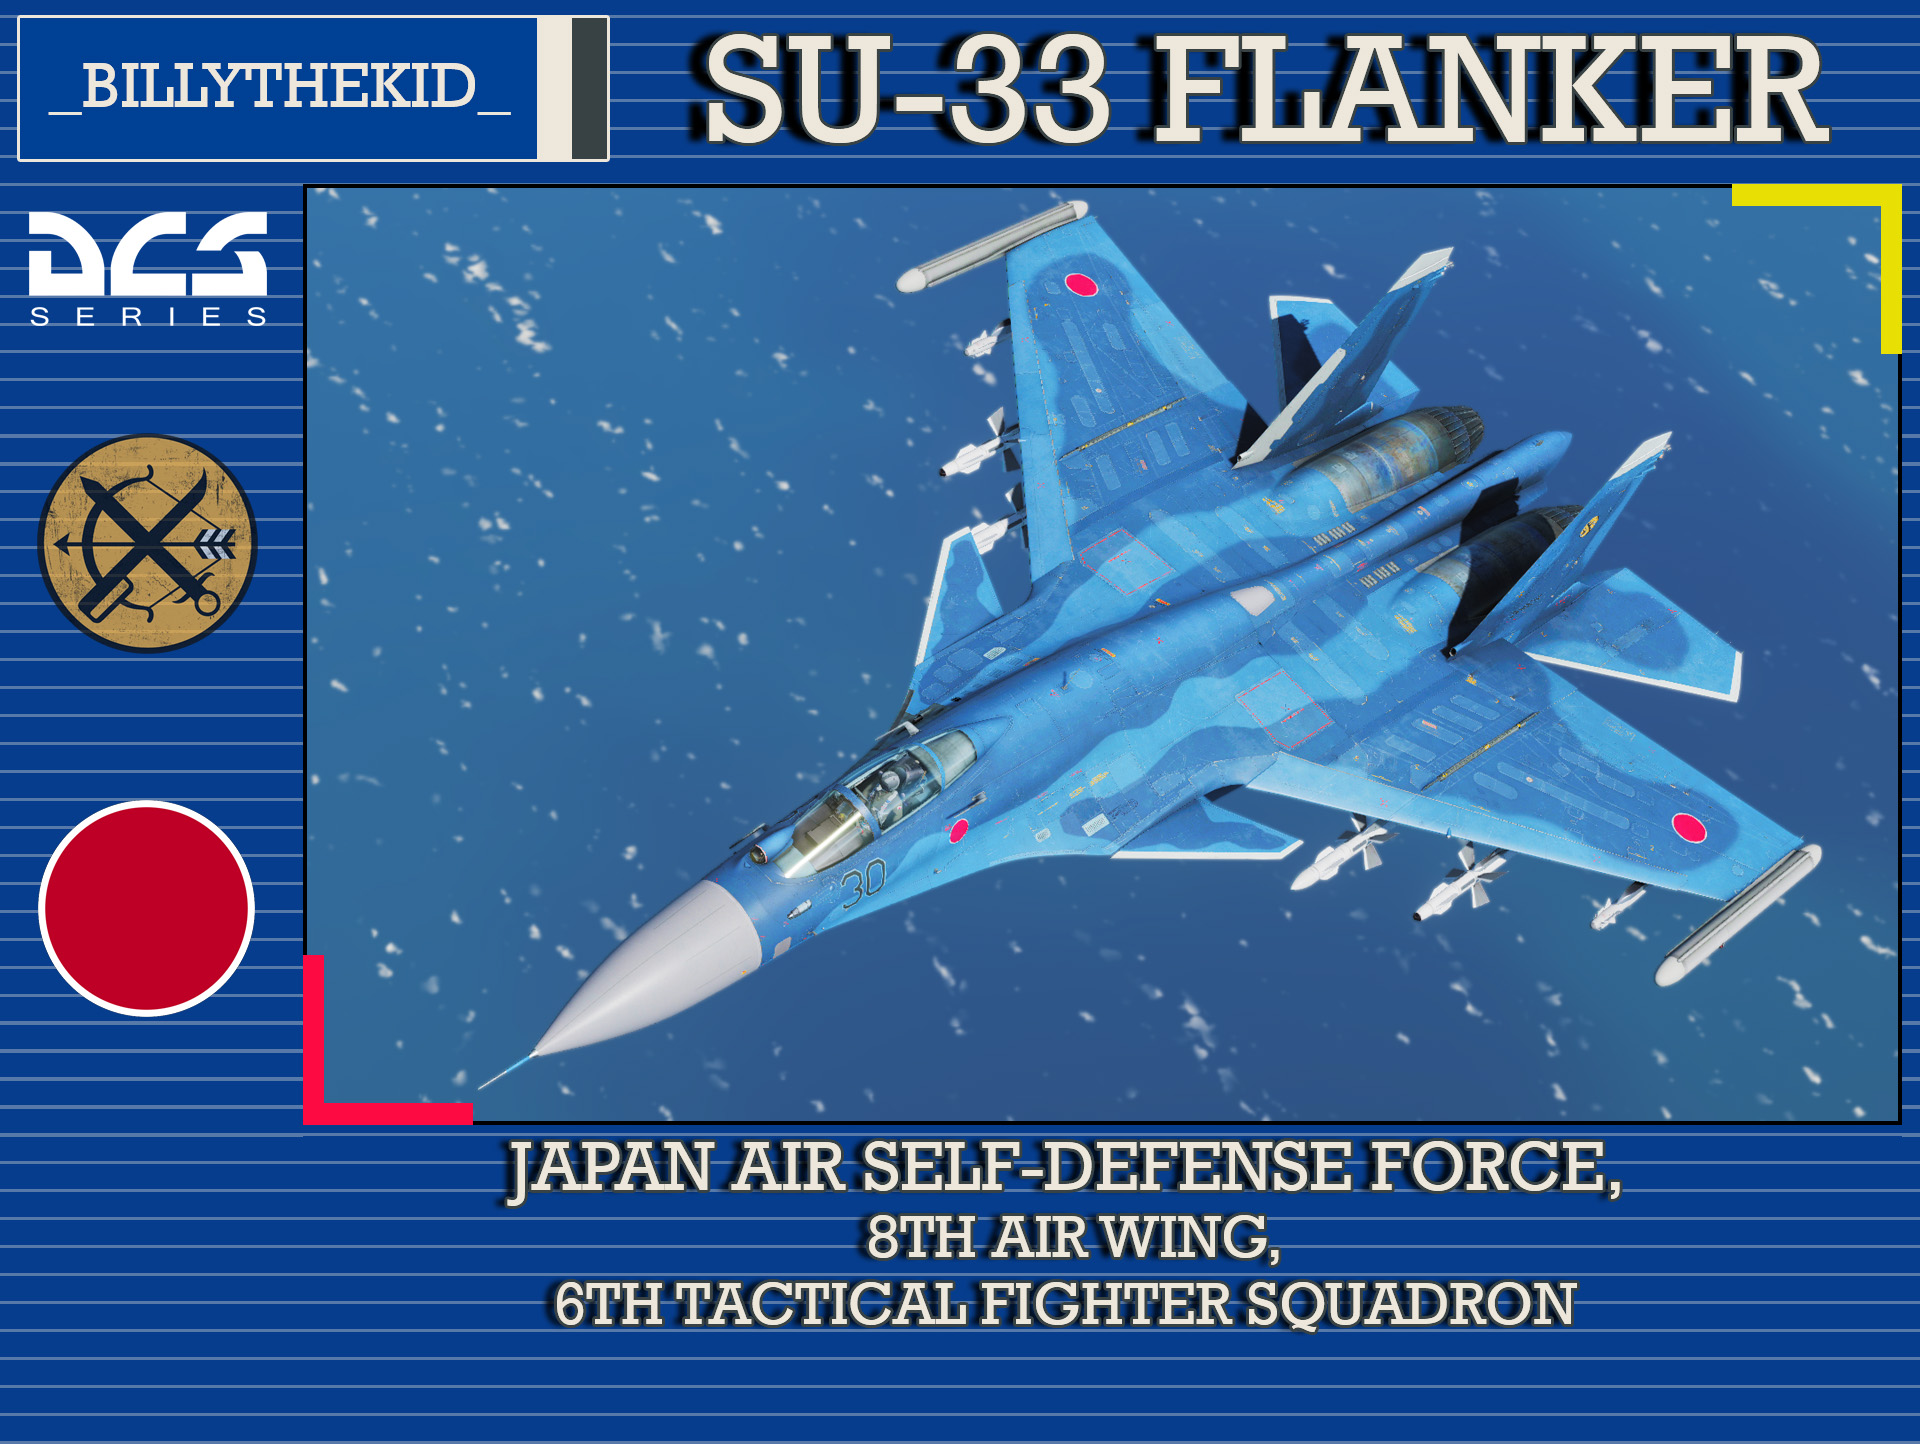 Fictional JASDF 8th Air Wing, 6th Tactical Fighter Squadron SU-33 Flanker 